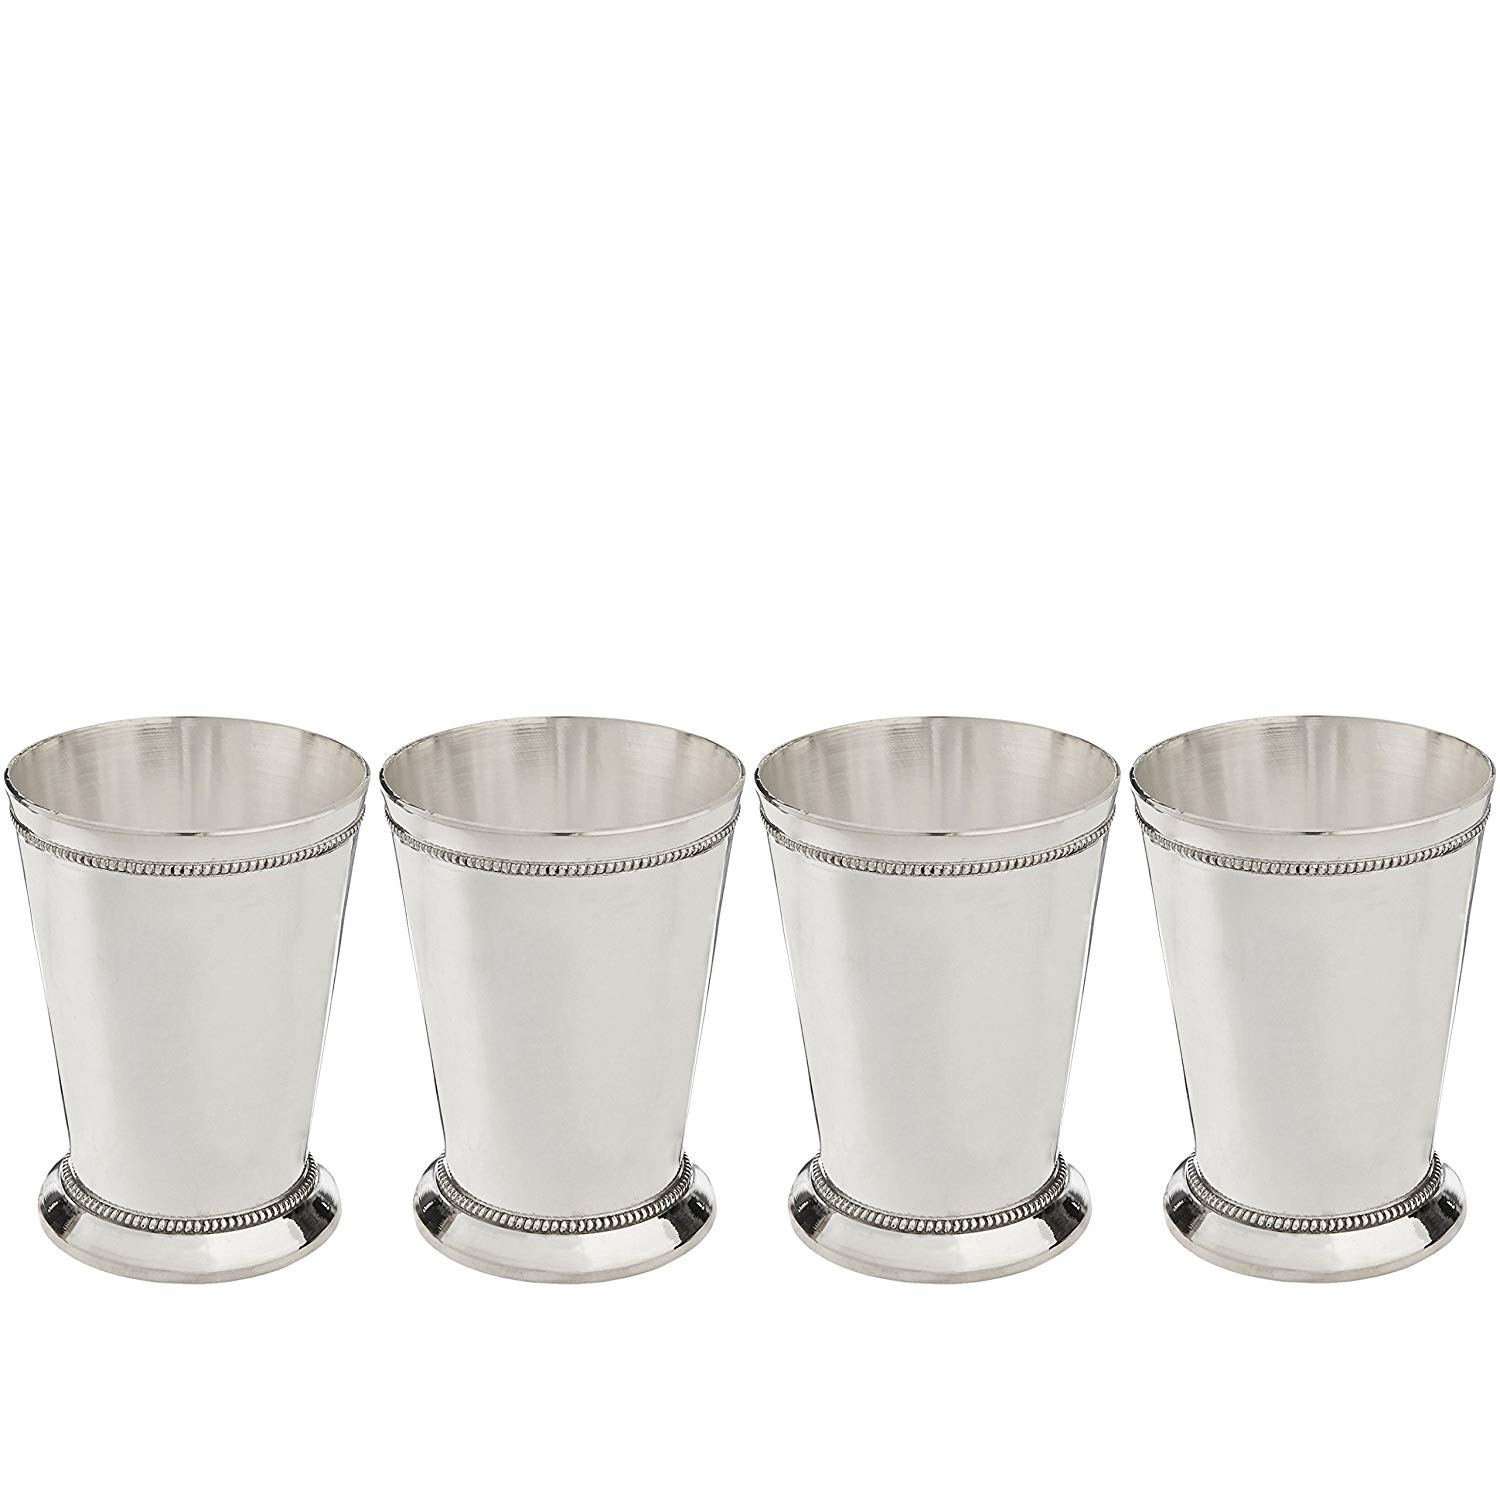 20 Nice Waterford Lismore Diamond Vase 2024 free download waterford lismore diamond vase of amazon com elegance silver silver plated beaded mint julep cup 12 pertaining to amazon com elegance silver silver plated beaded mint julep cup 12 oz set of 